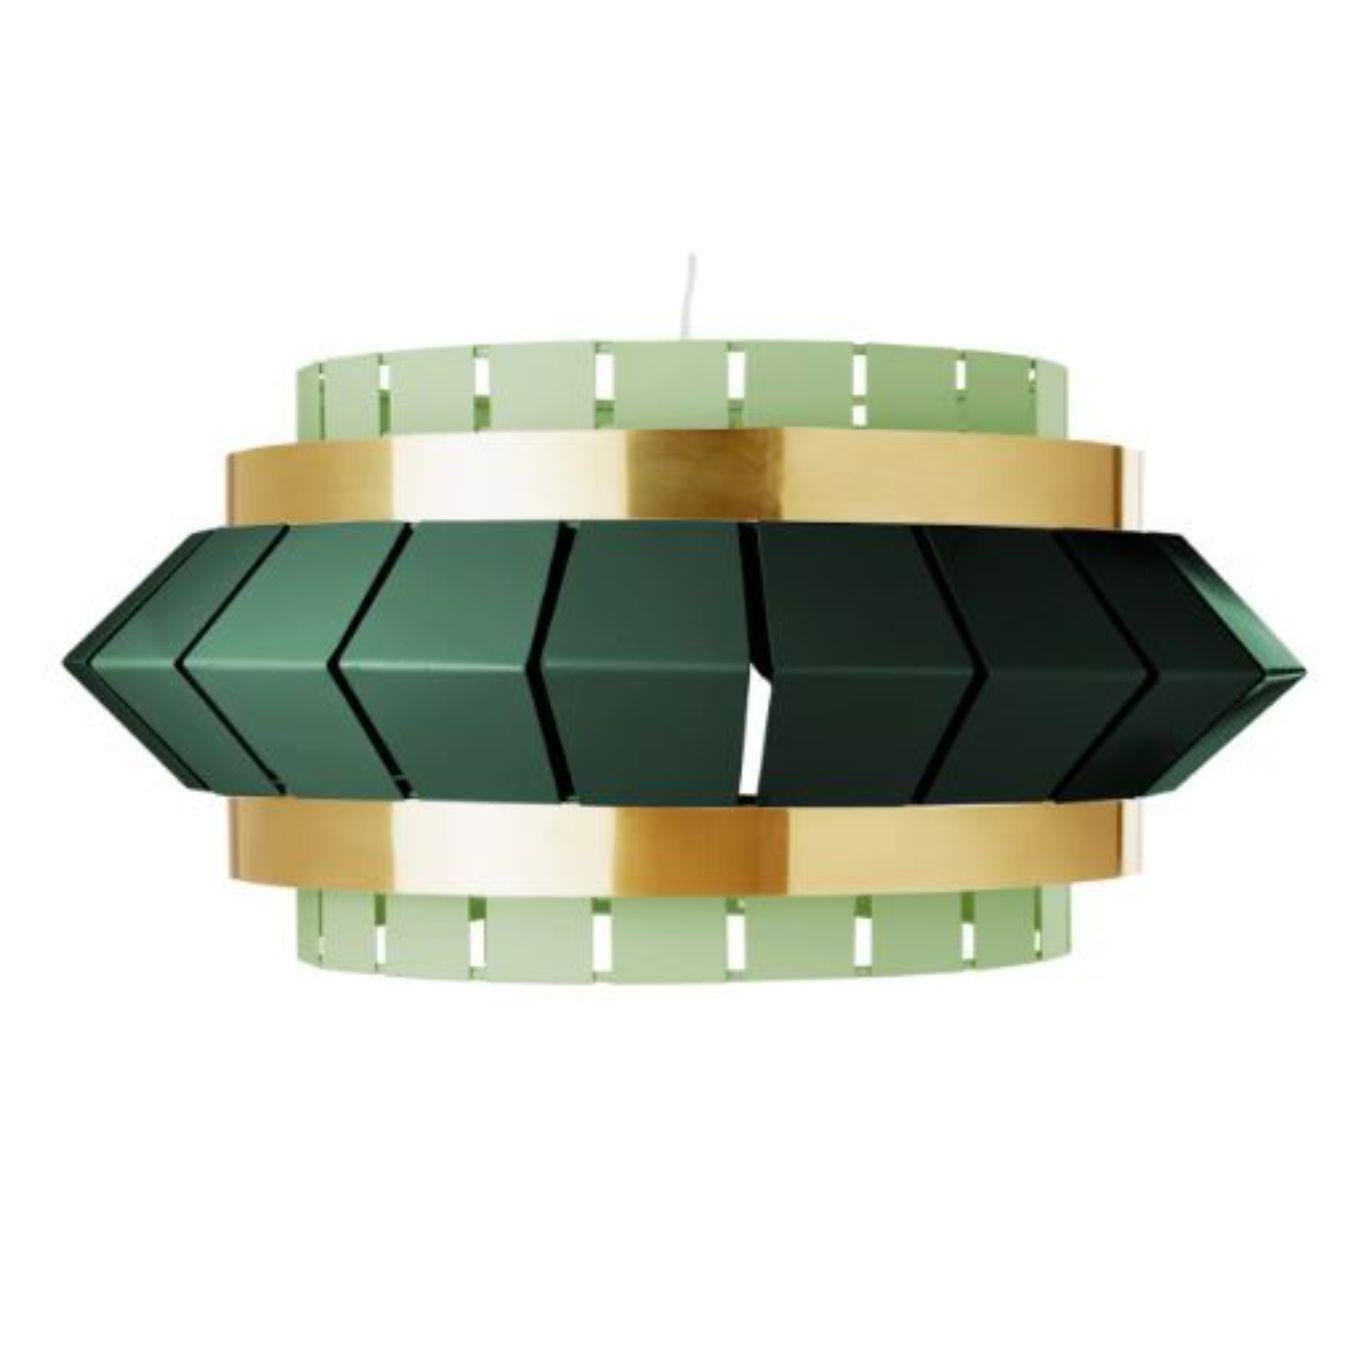 Ivory and Jade Comb I suspension lamp with brass ring by Dooq.
Dimensions: W 75 x D 75 x H 35 cm
Materials: lacquered metal, polished brass.
Also available in different colors and materials.

Information:
230V/50Hz
E27/1x20W